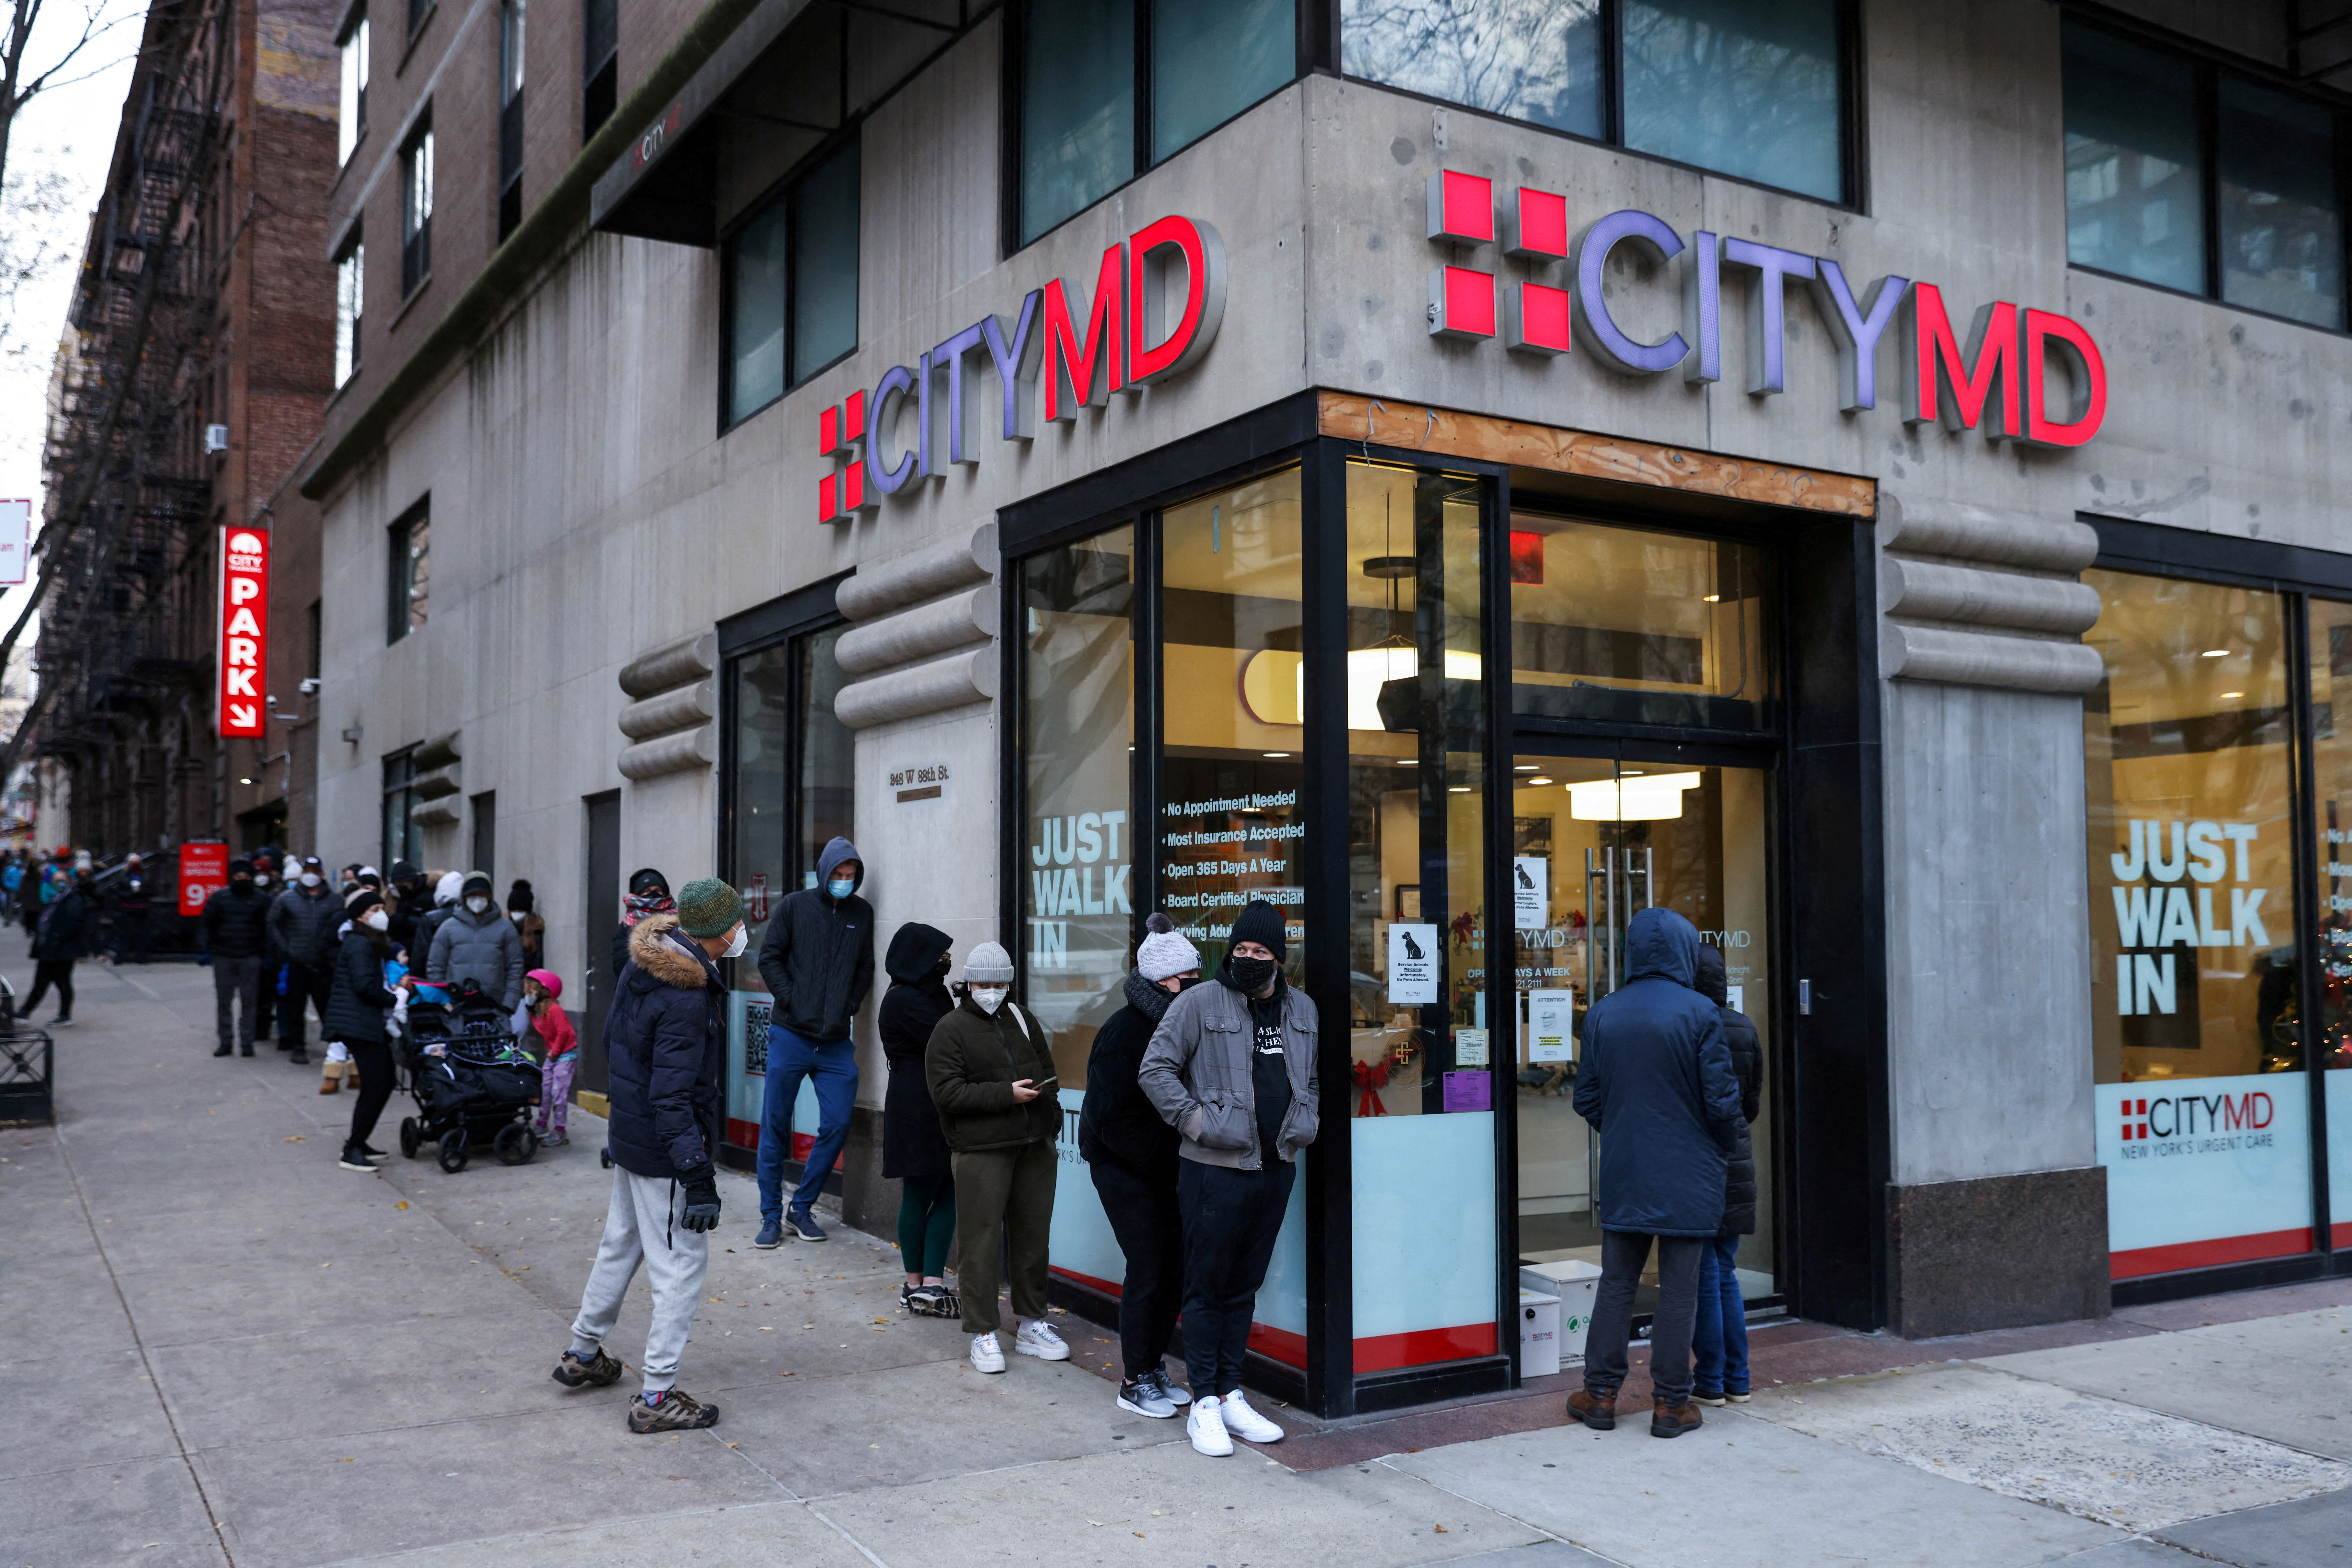 People wait in a queue to enter CityMD, a health clinic that offers coronavirus disease (COVID-19) testing, on the Upper West Side as the Omicron coronavirus variant continues to spread in Manhattan, New York City